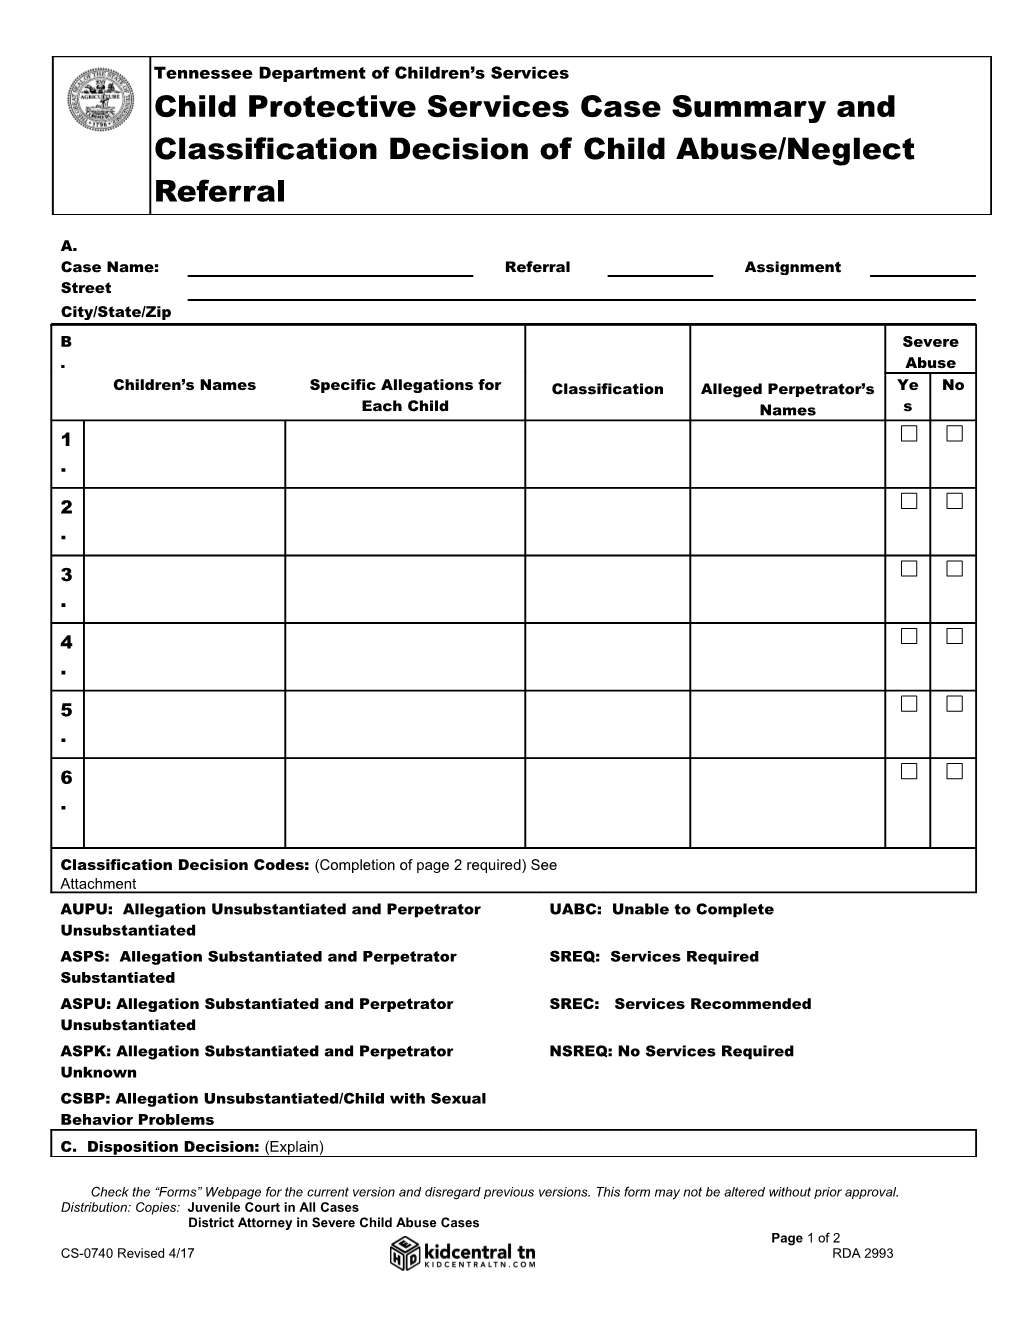 CPS Investigation Summary and Classification Decision of Child Abuse/Neglect Referral CS-0740